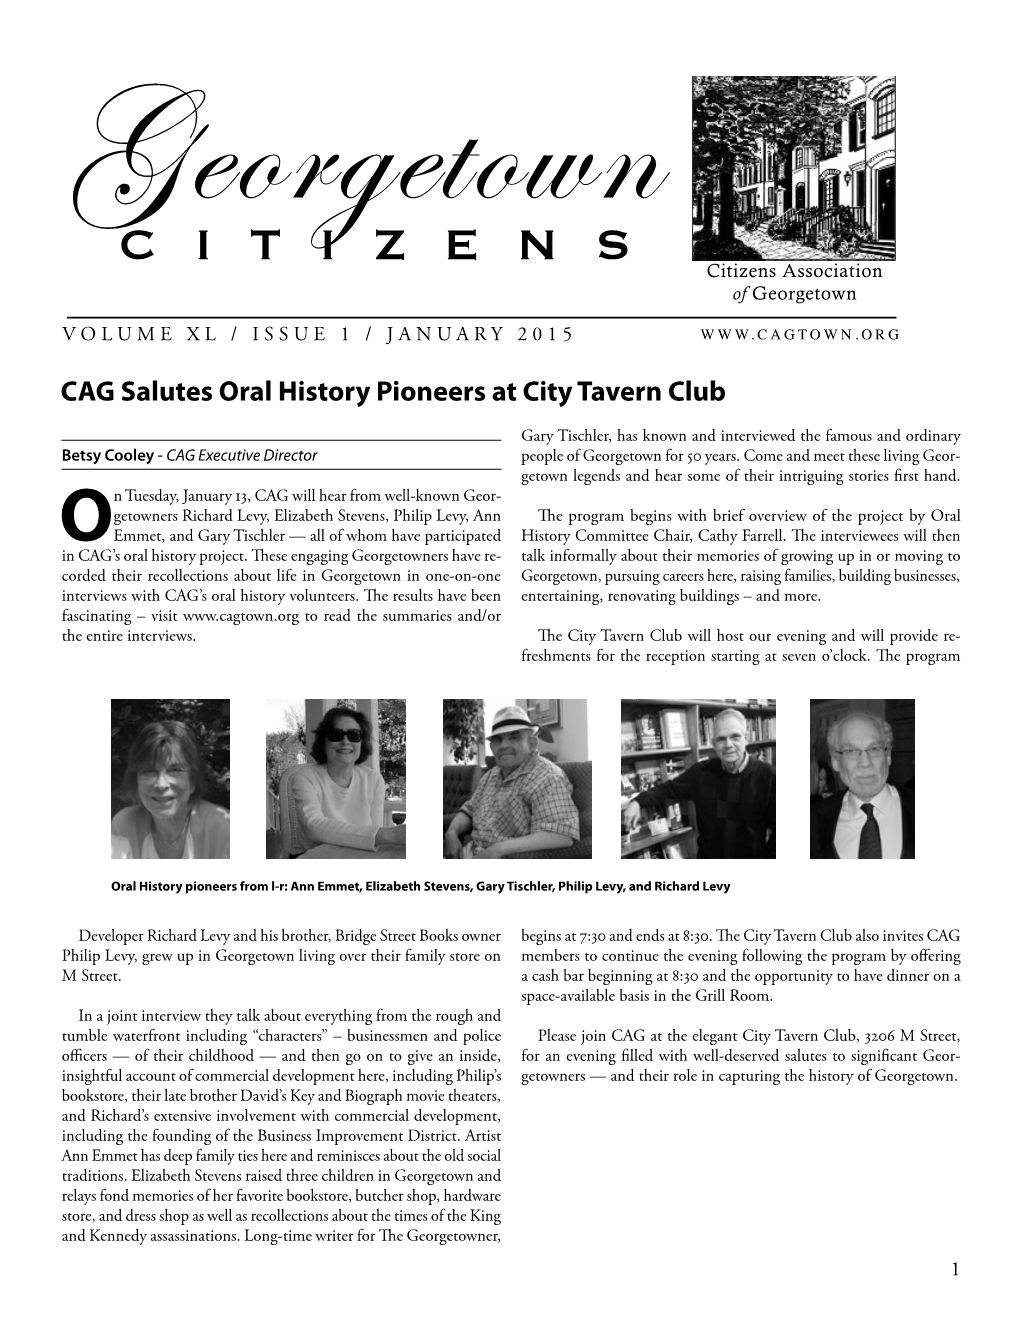 CAG Salutes Oral History Pioneers at City Tavern Club